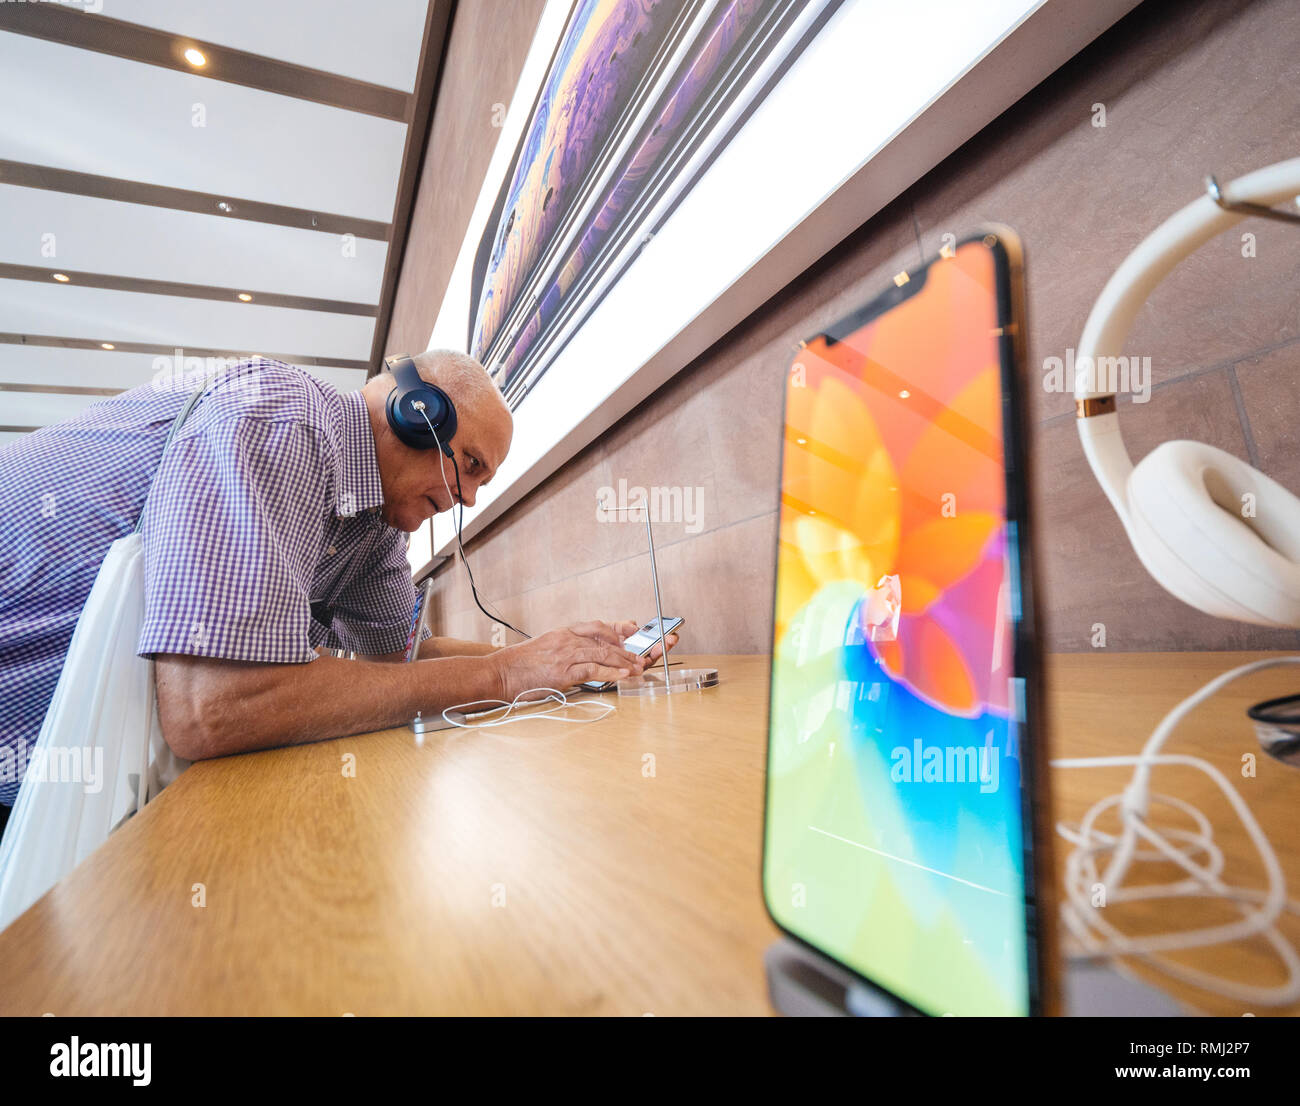 STRASBOURG, FRANCE - SEP 21, 2018: Funny curious caucasian senior man testing Apple Beats by Dr Dre headphones with Apple Music on the new iPhone Xs Max smartphones in modern Apple Store  Stock Photo